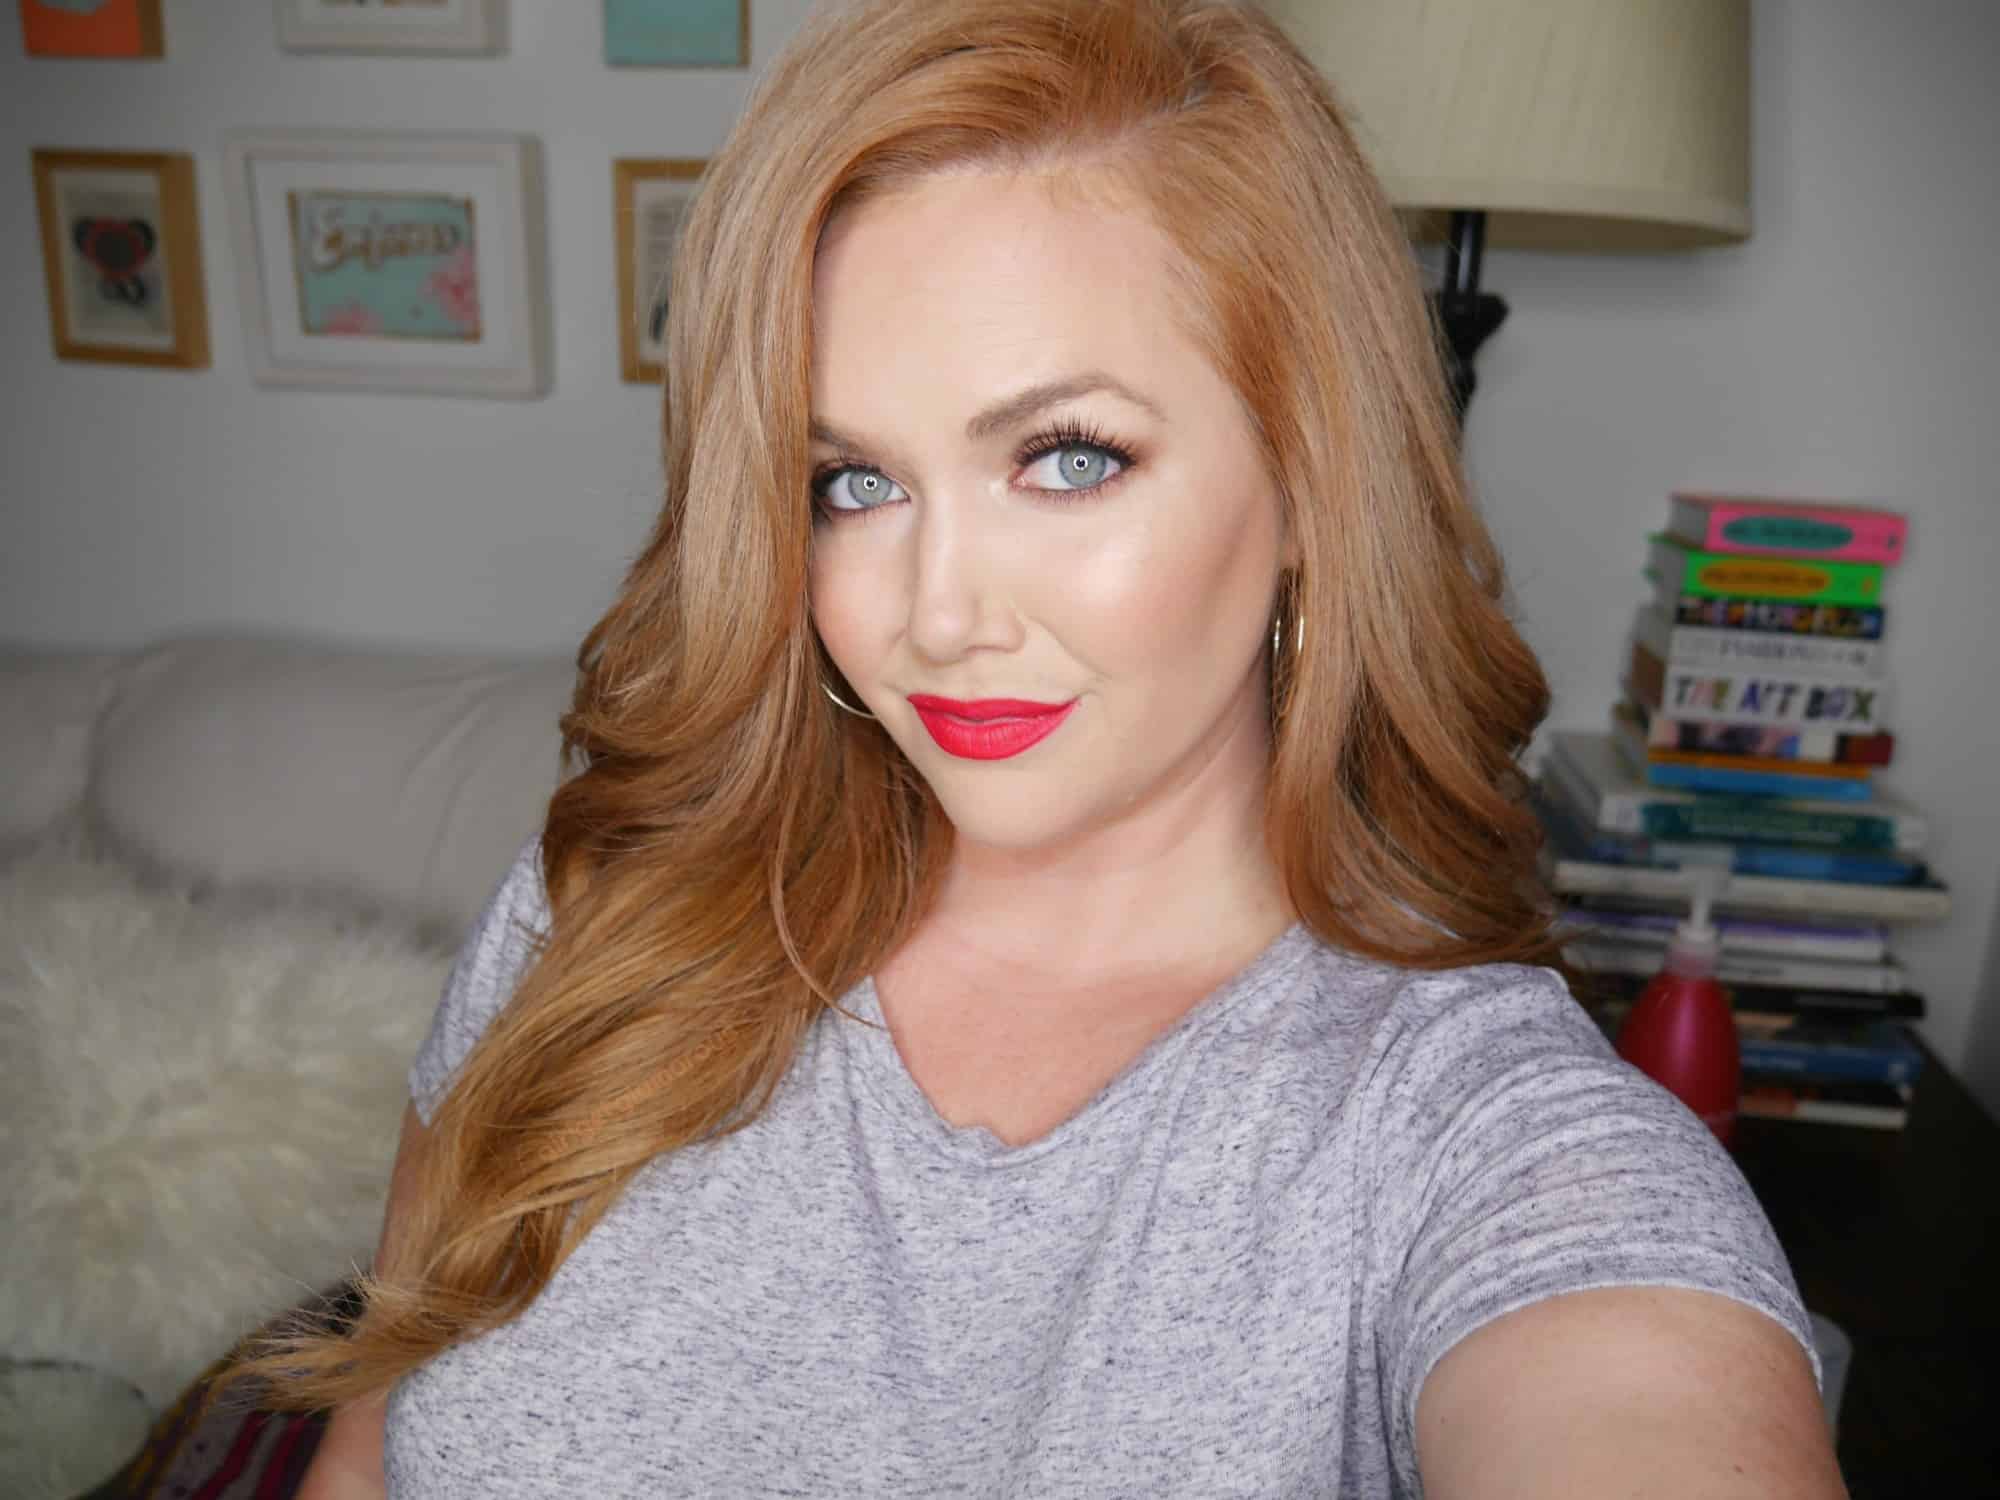 Strawberry blonde hair dye diy idea hairstyles inspo color red ginger light extensions